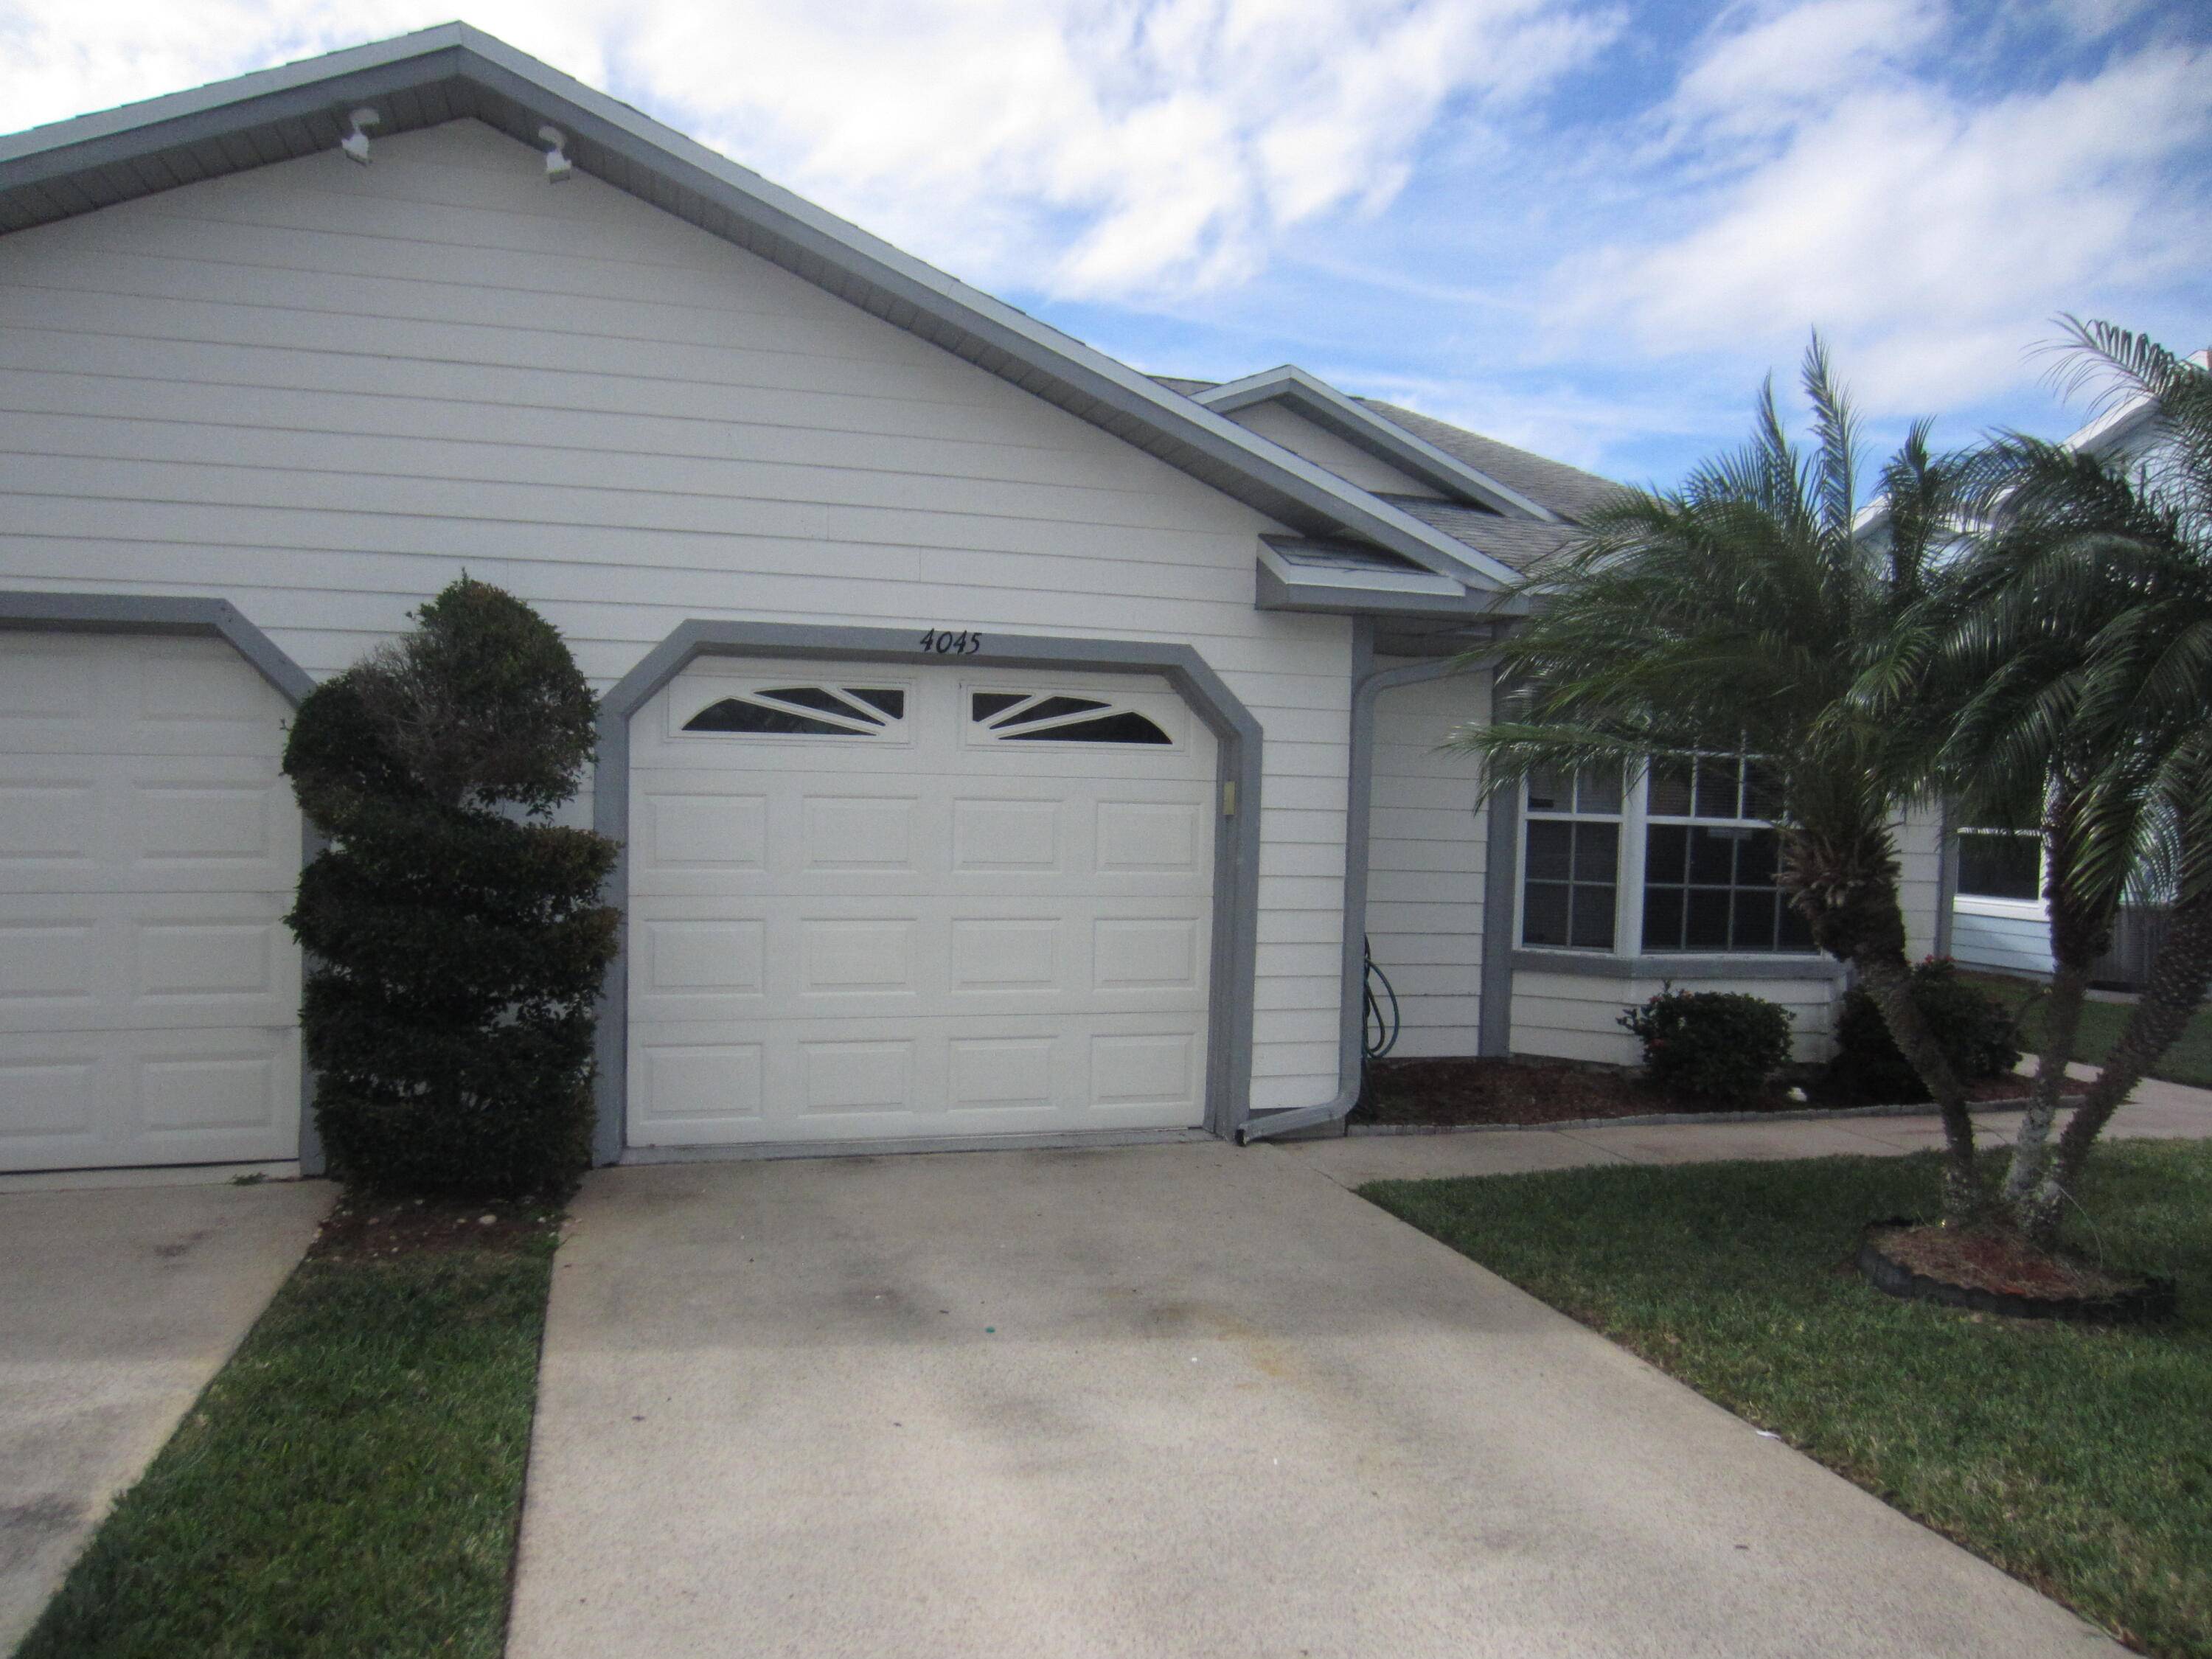 Very nice 2 bedroom, 2 bath 1 car garage villa at one of the highly desired golf courses on the treasure coast.